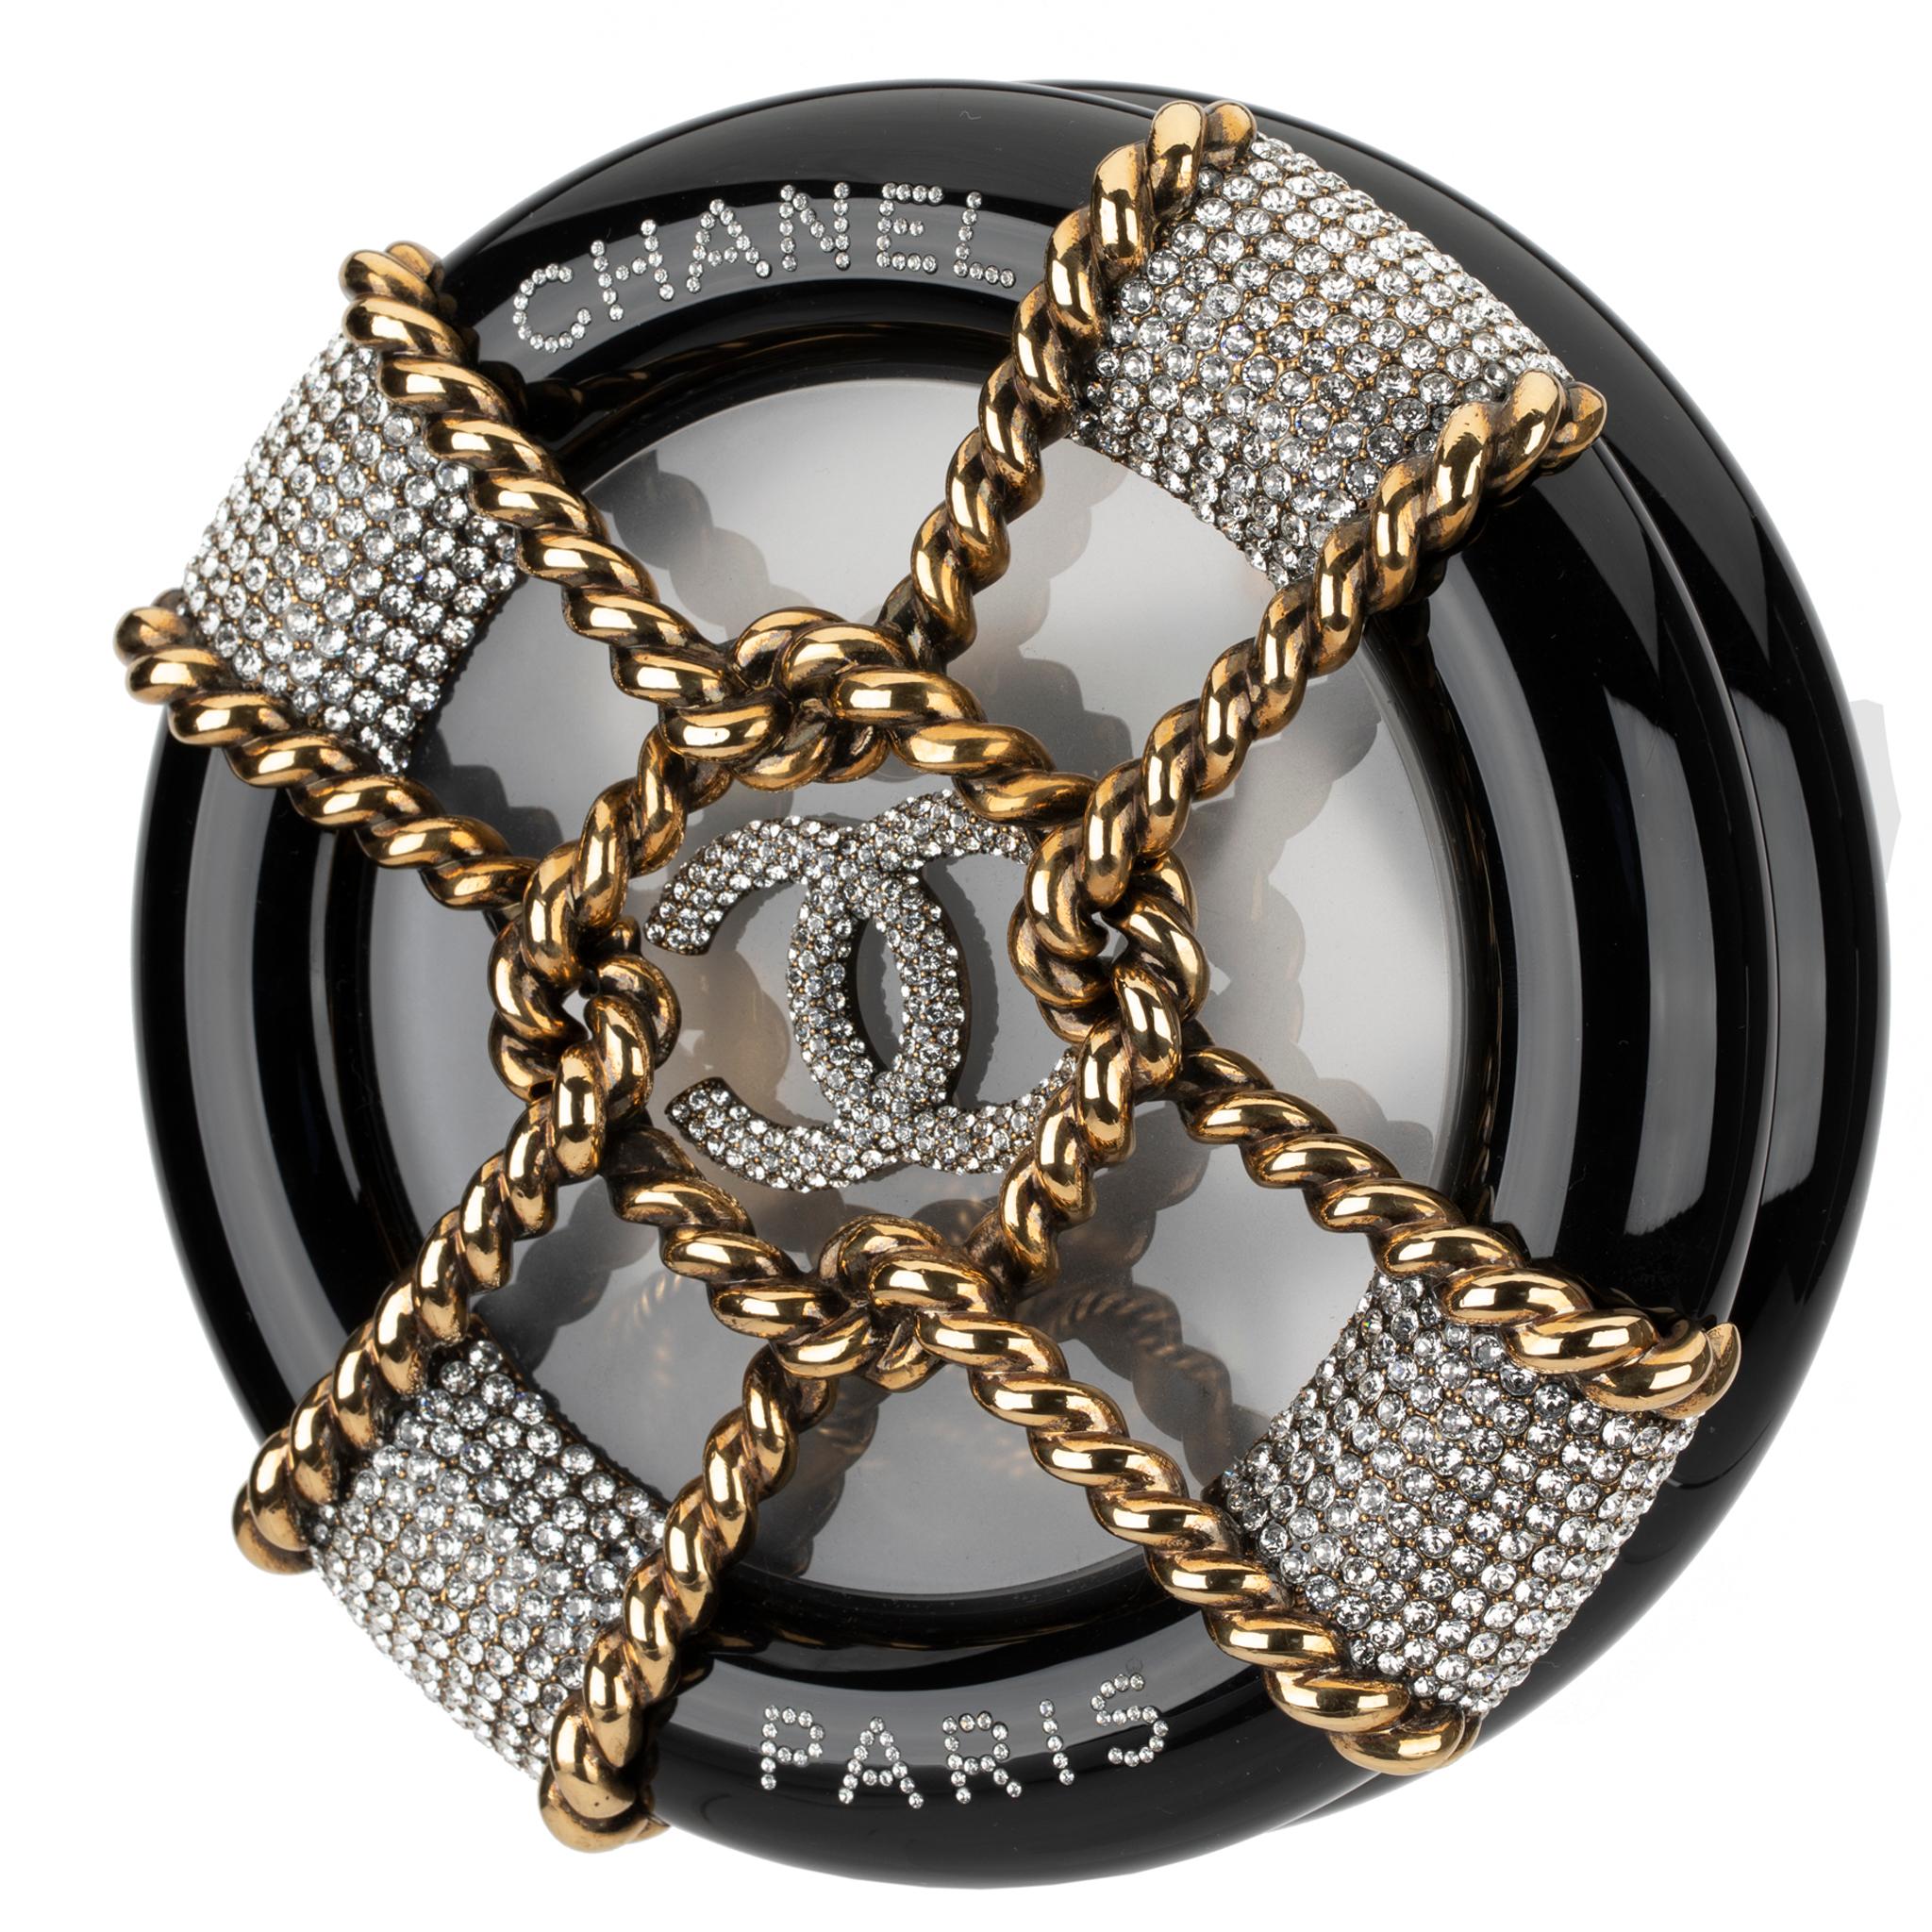 The Chanel Rescue Wheel Minaudiere is skilfully crafted from lucite. Inspired by nautical origins, the design features rhinestones, the iconic double C logo, intertwined gold rope and a frosted window centre. A push button clasp opens to reveal